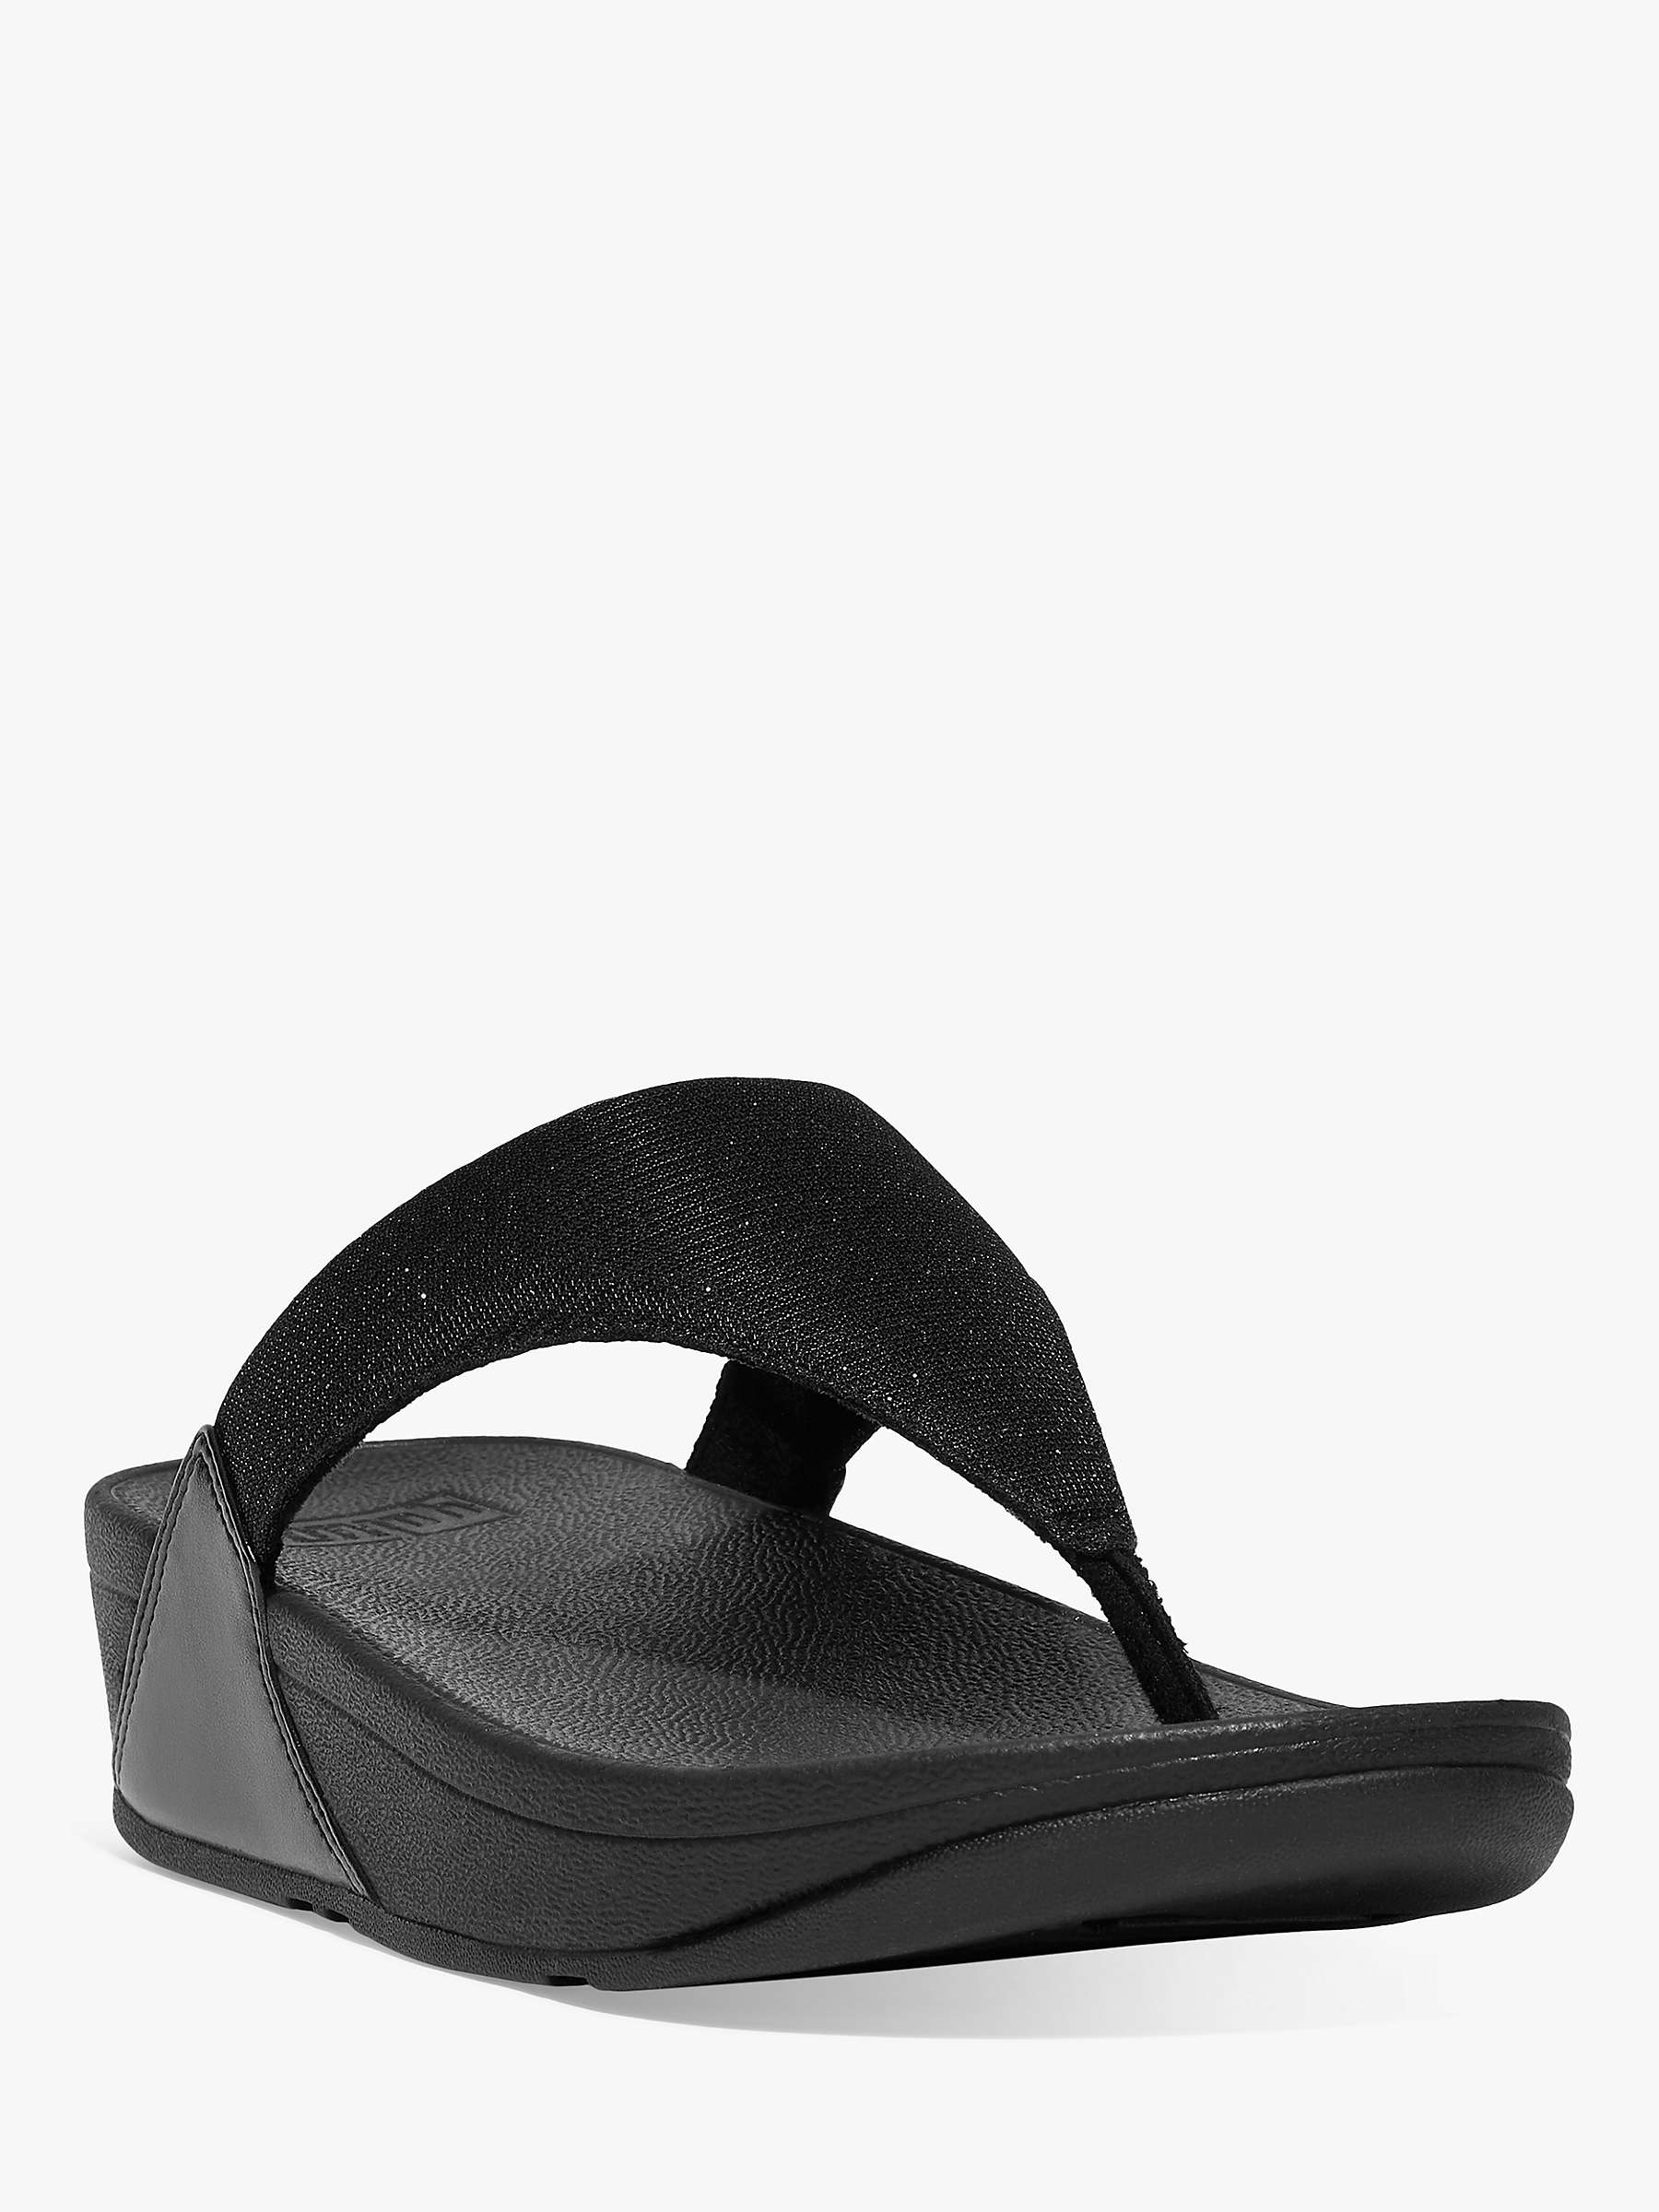 Buy FitFlop Lulu Glitzy Toe Post Sandals, All Black Online at johnlewis.com